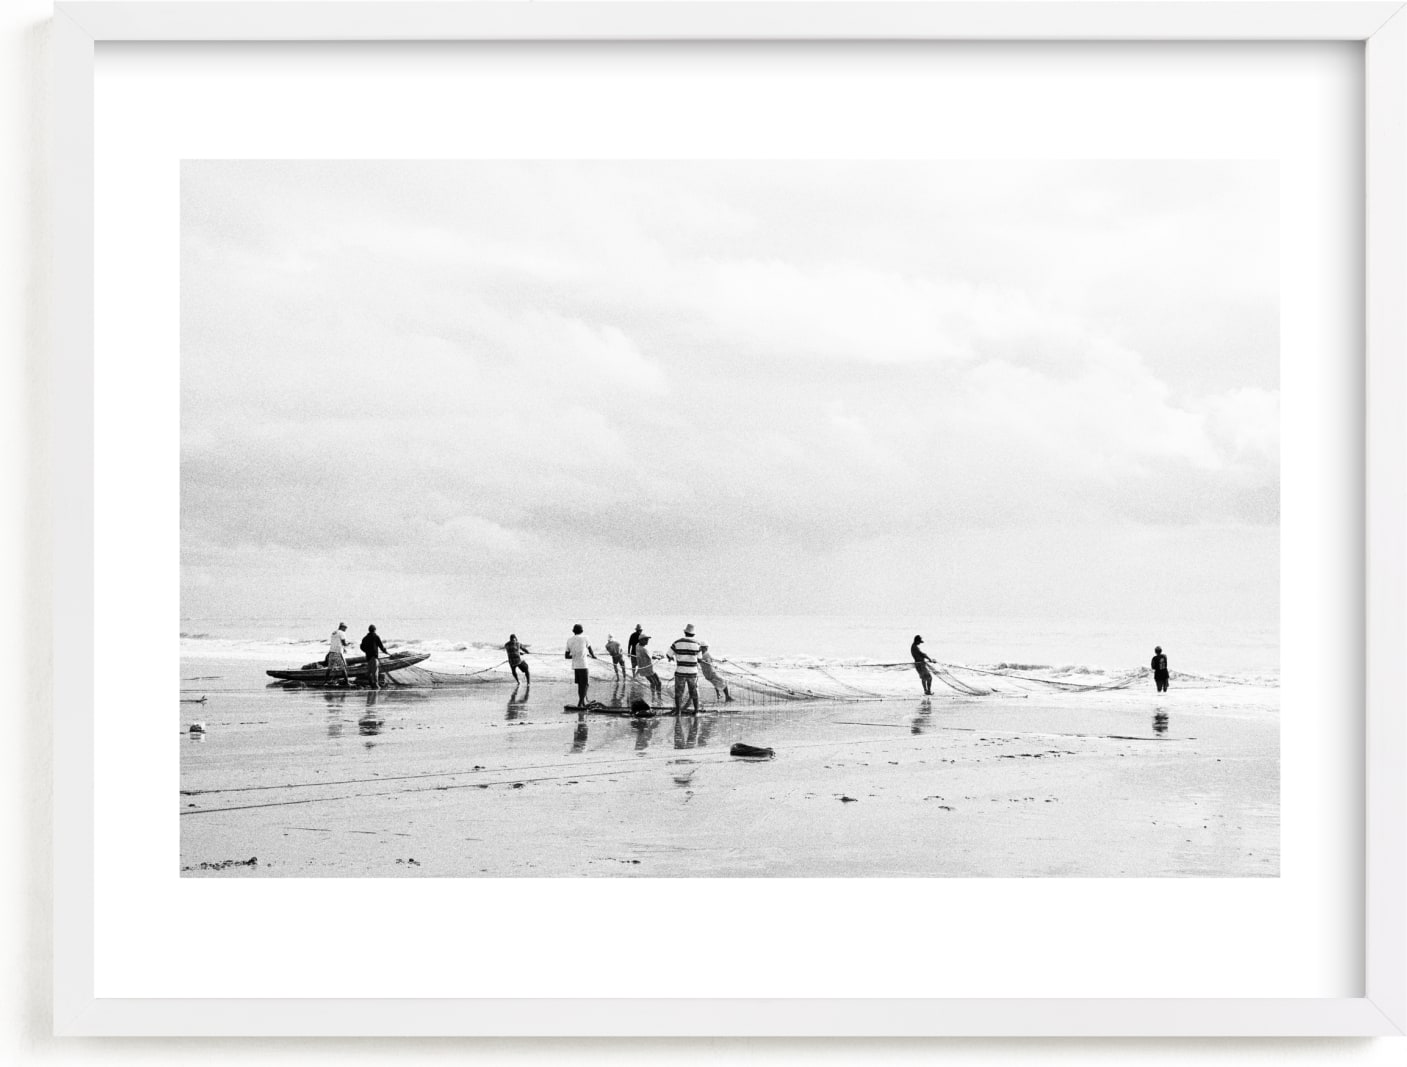 This is a black and white kids wall art by Eliane Lamb called The fishermen 1.